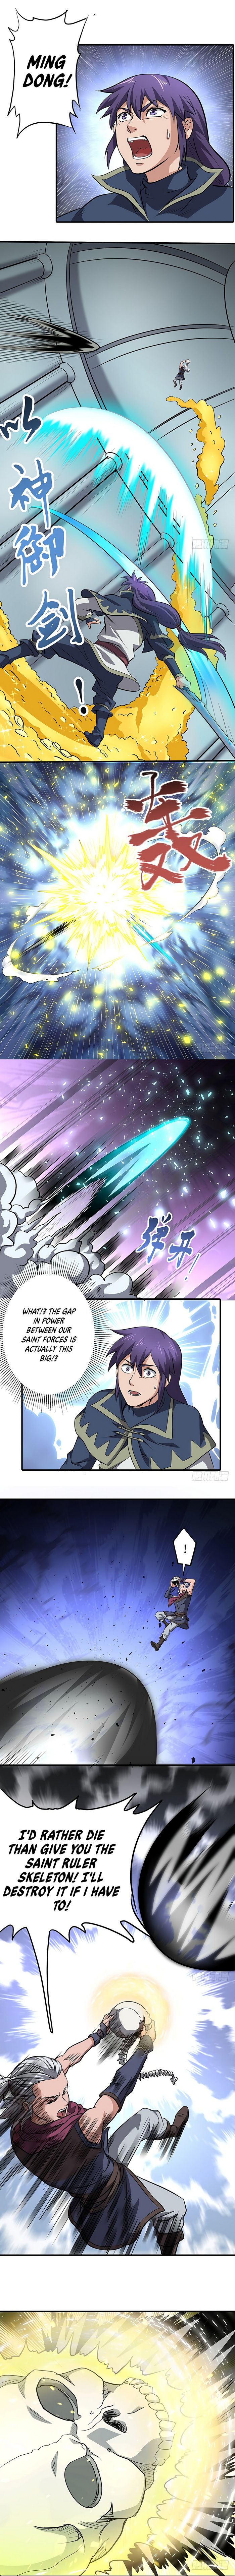 Chaotic Sword God - Page 3